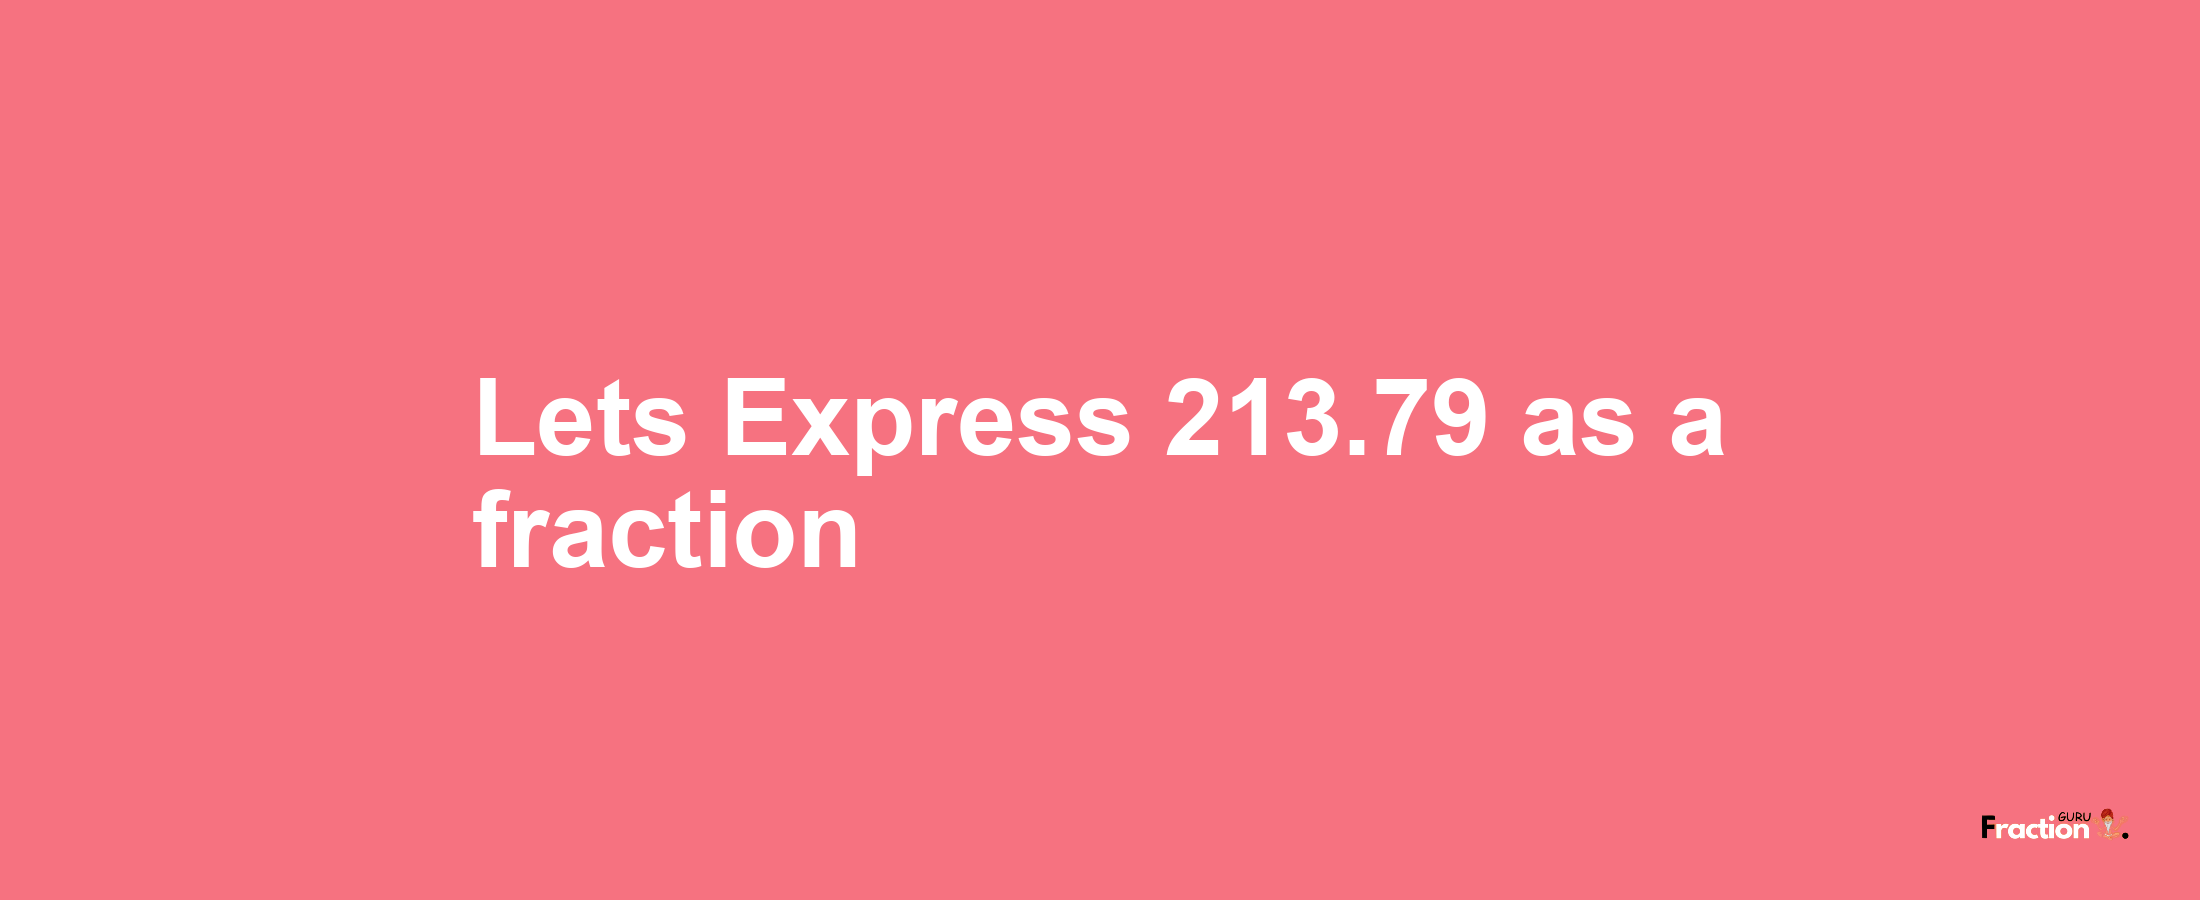 Lets Express 213.79 as afraction